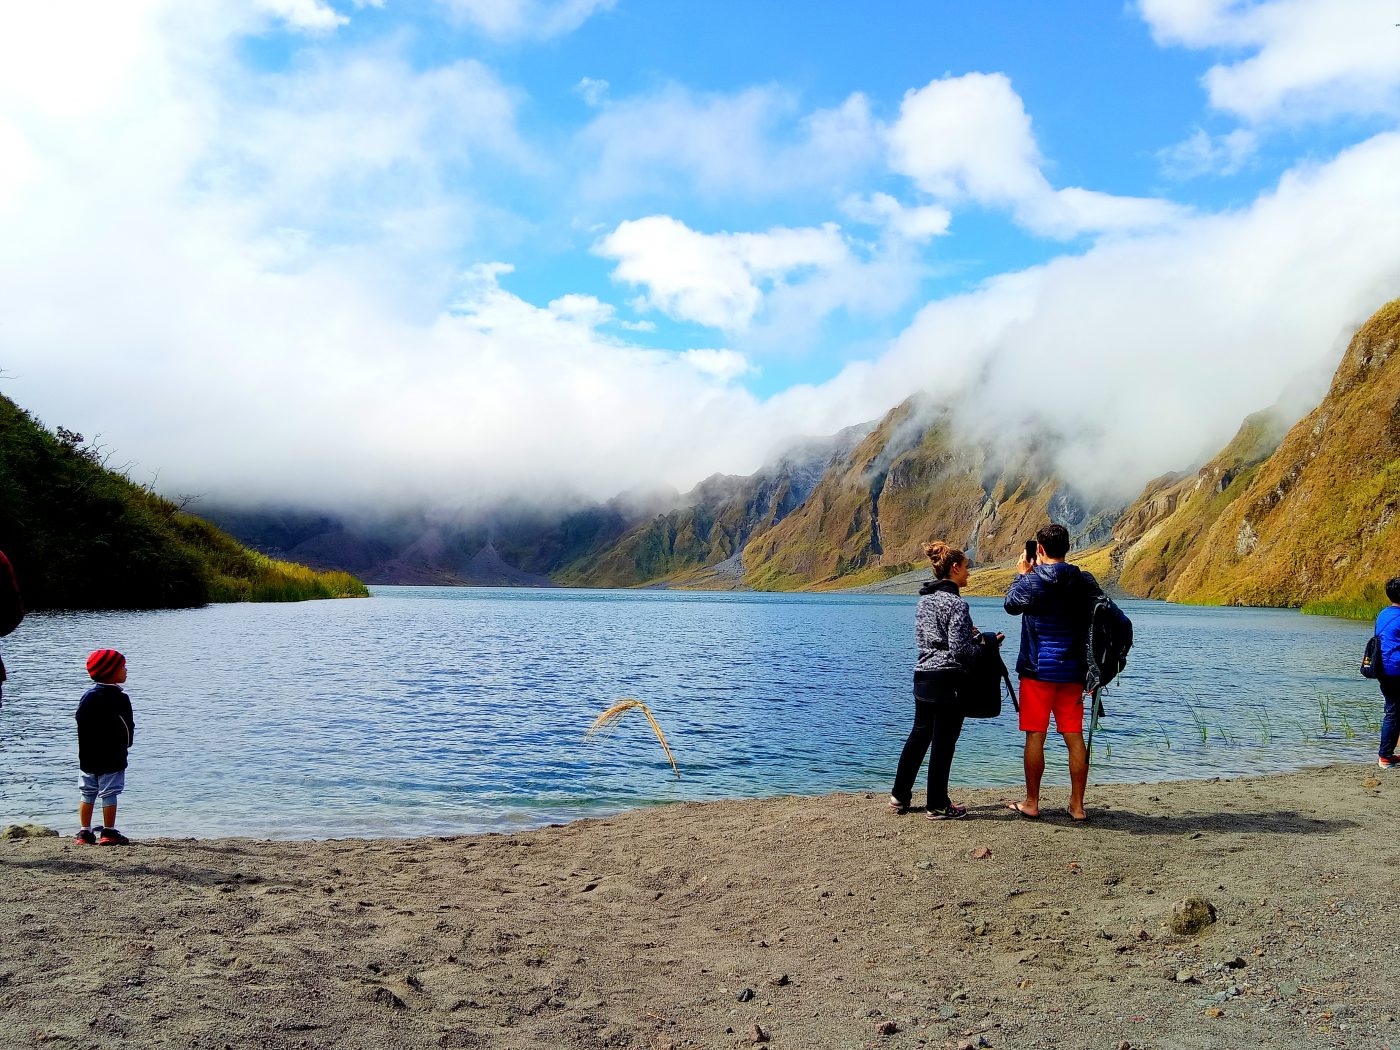 MT. PINATUBO : A Hike With A Story